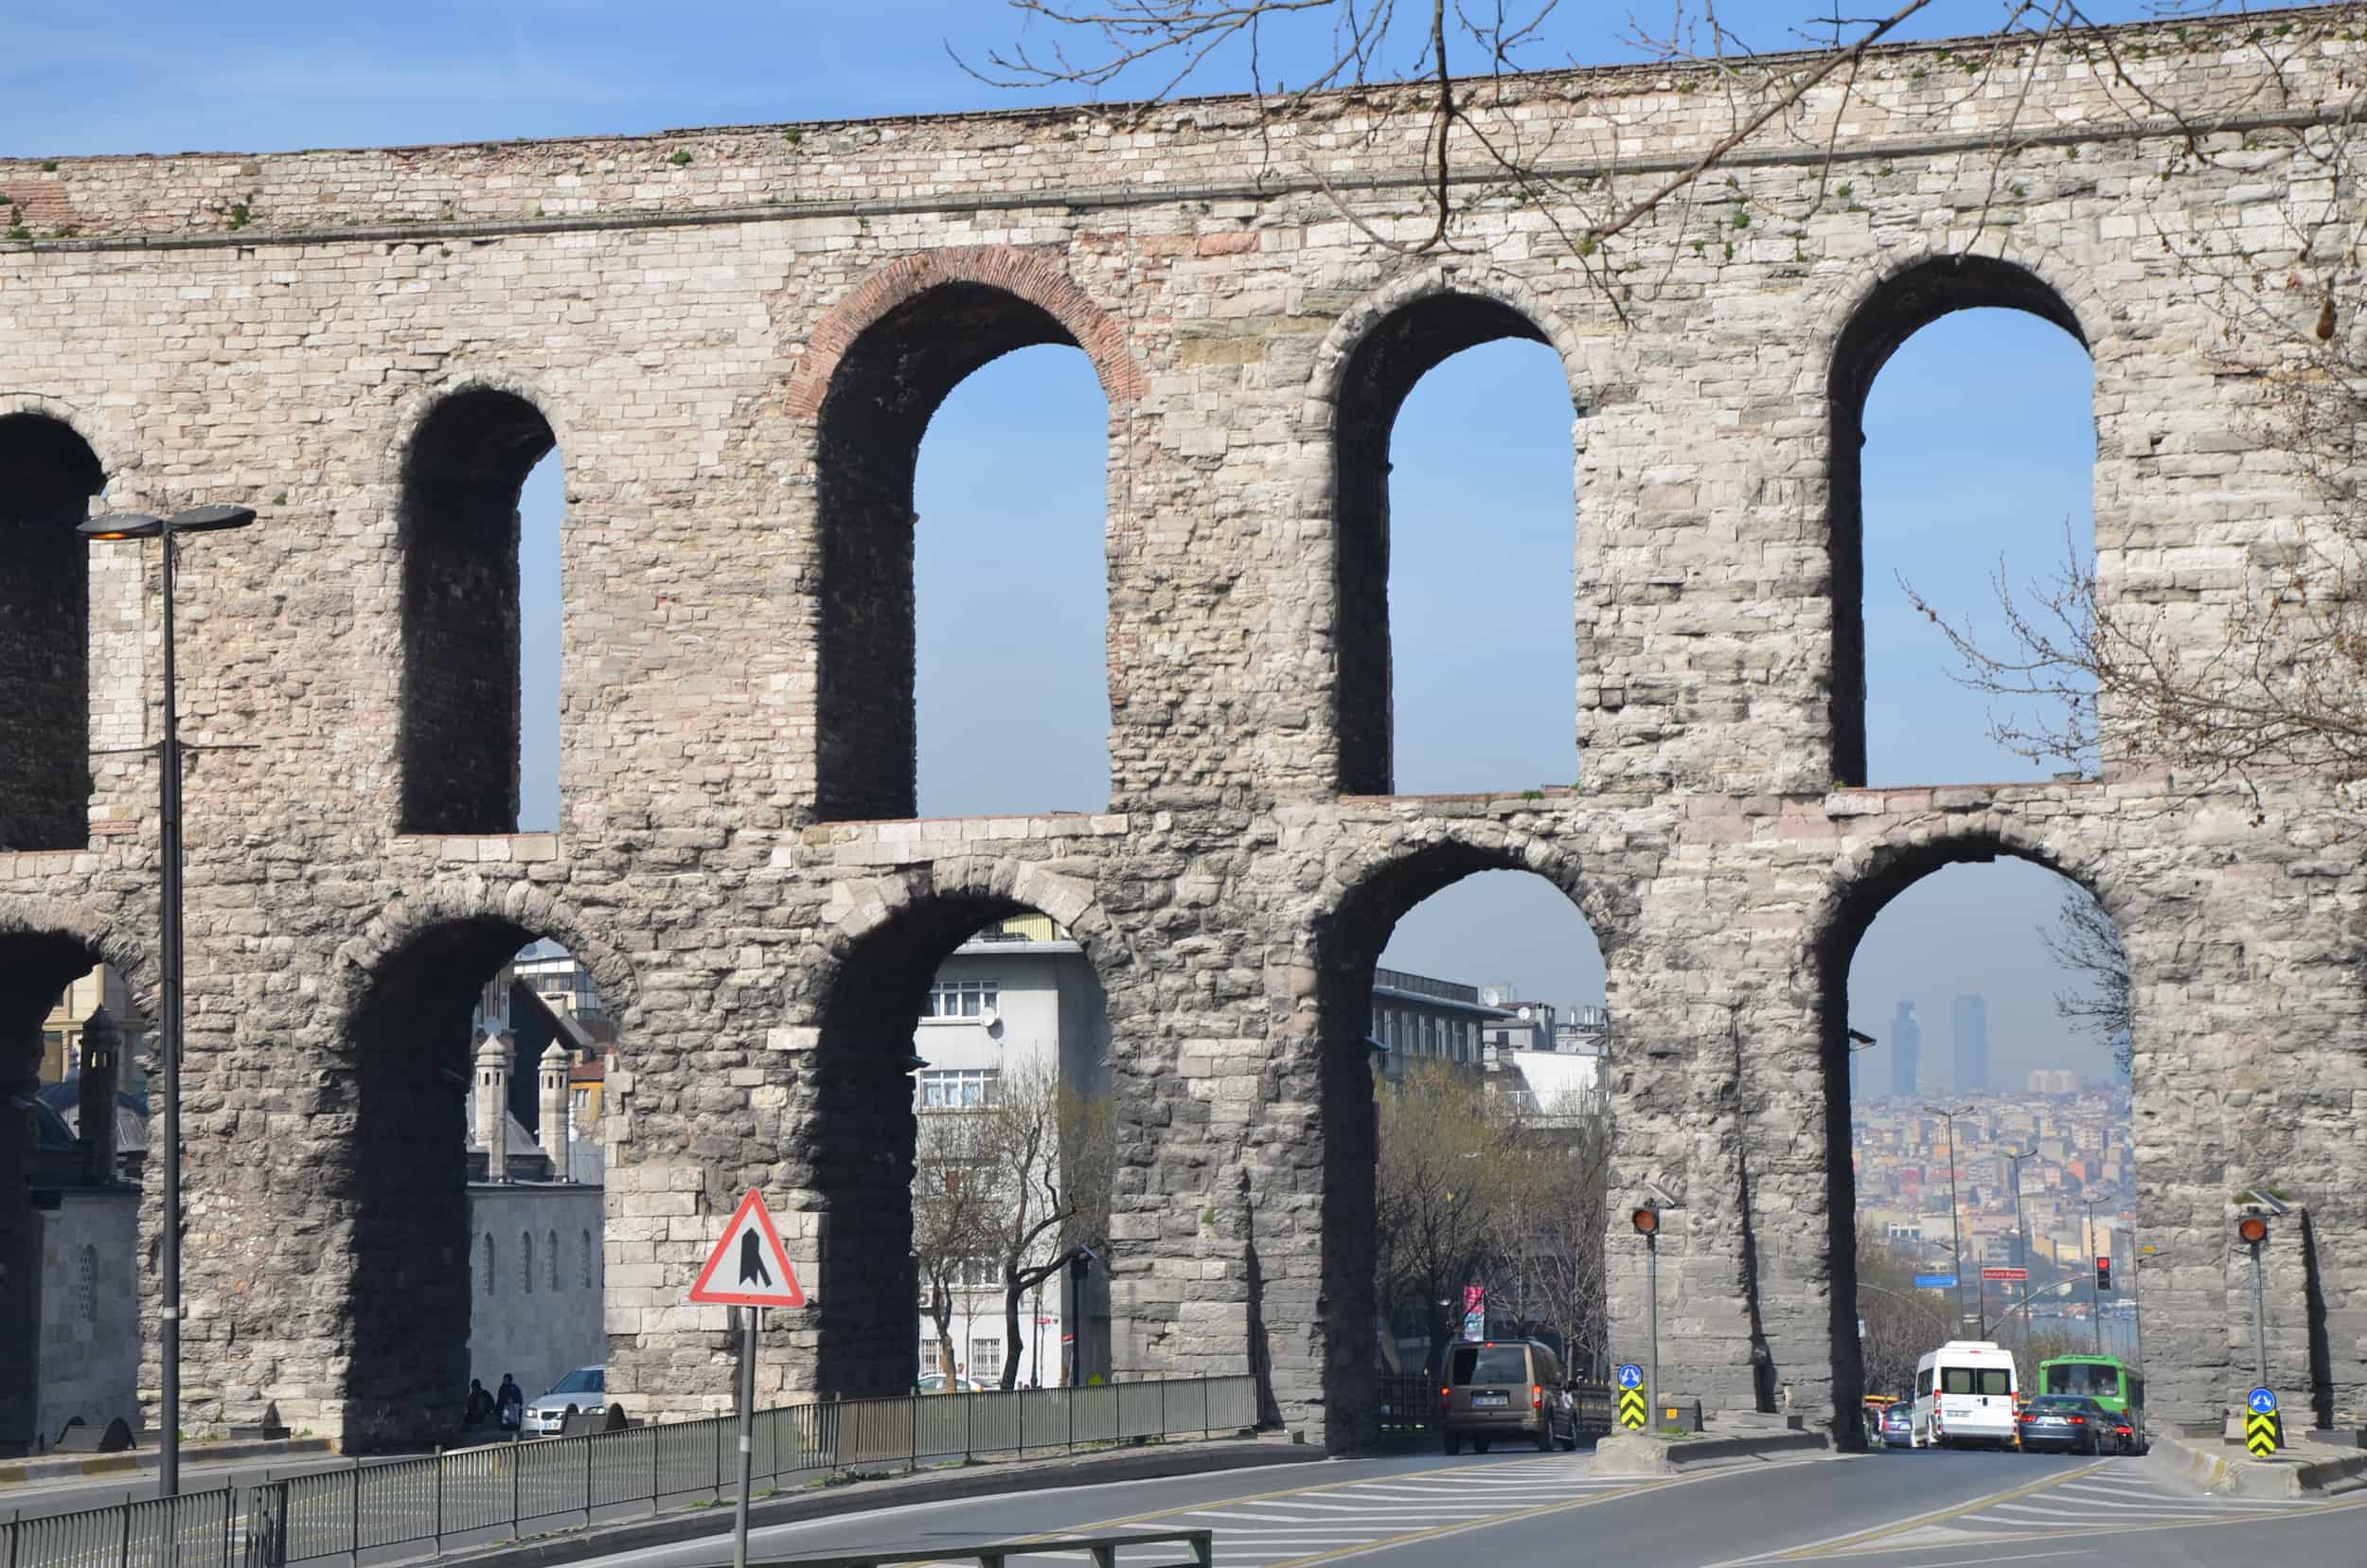 Traffic passing under the Aqueduct of Valens in Saraçhane, Istanbul, Turkey